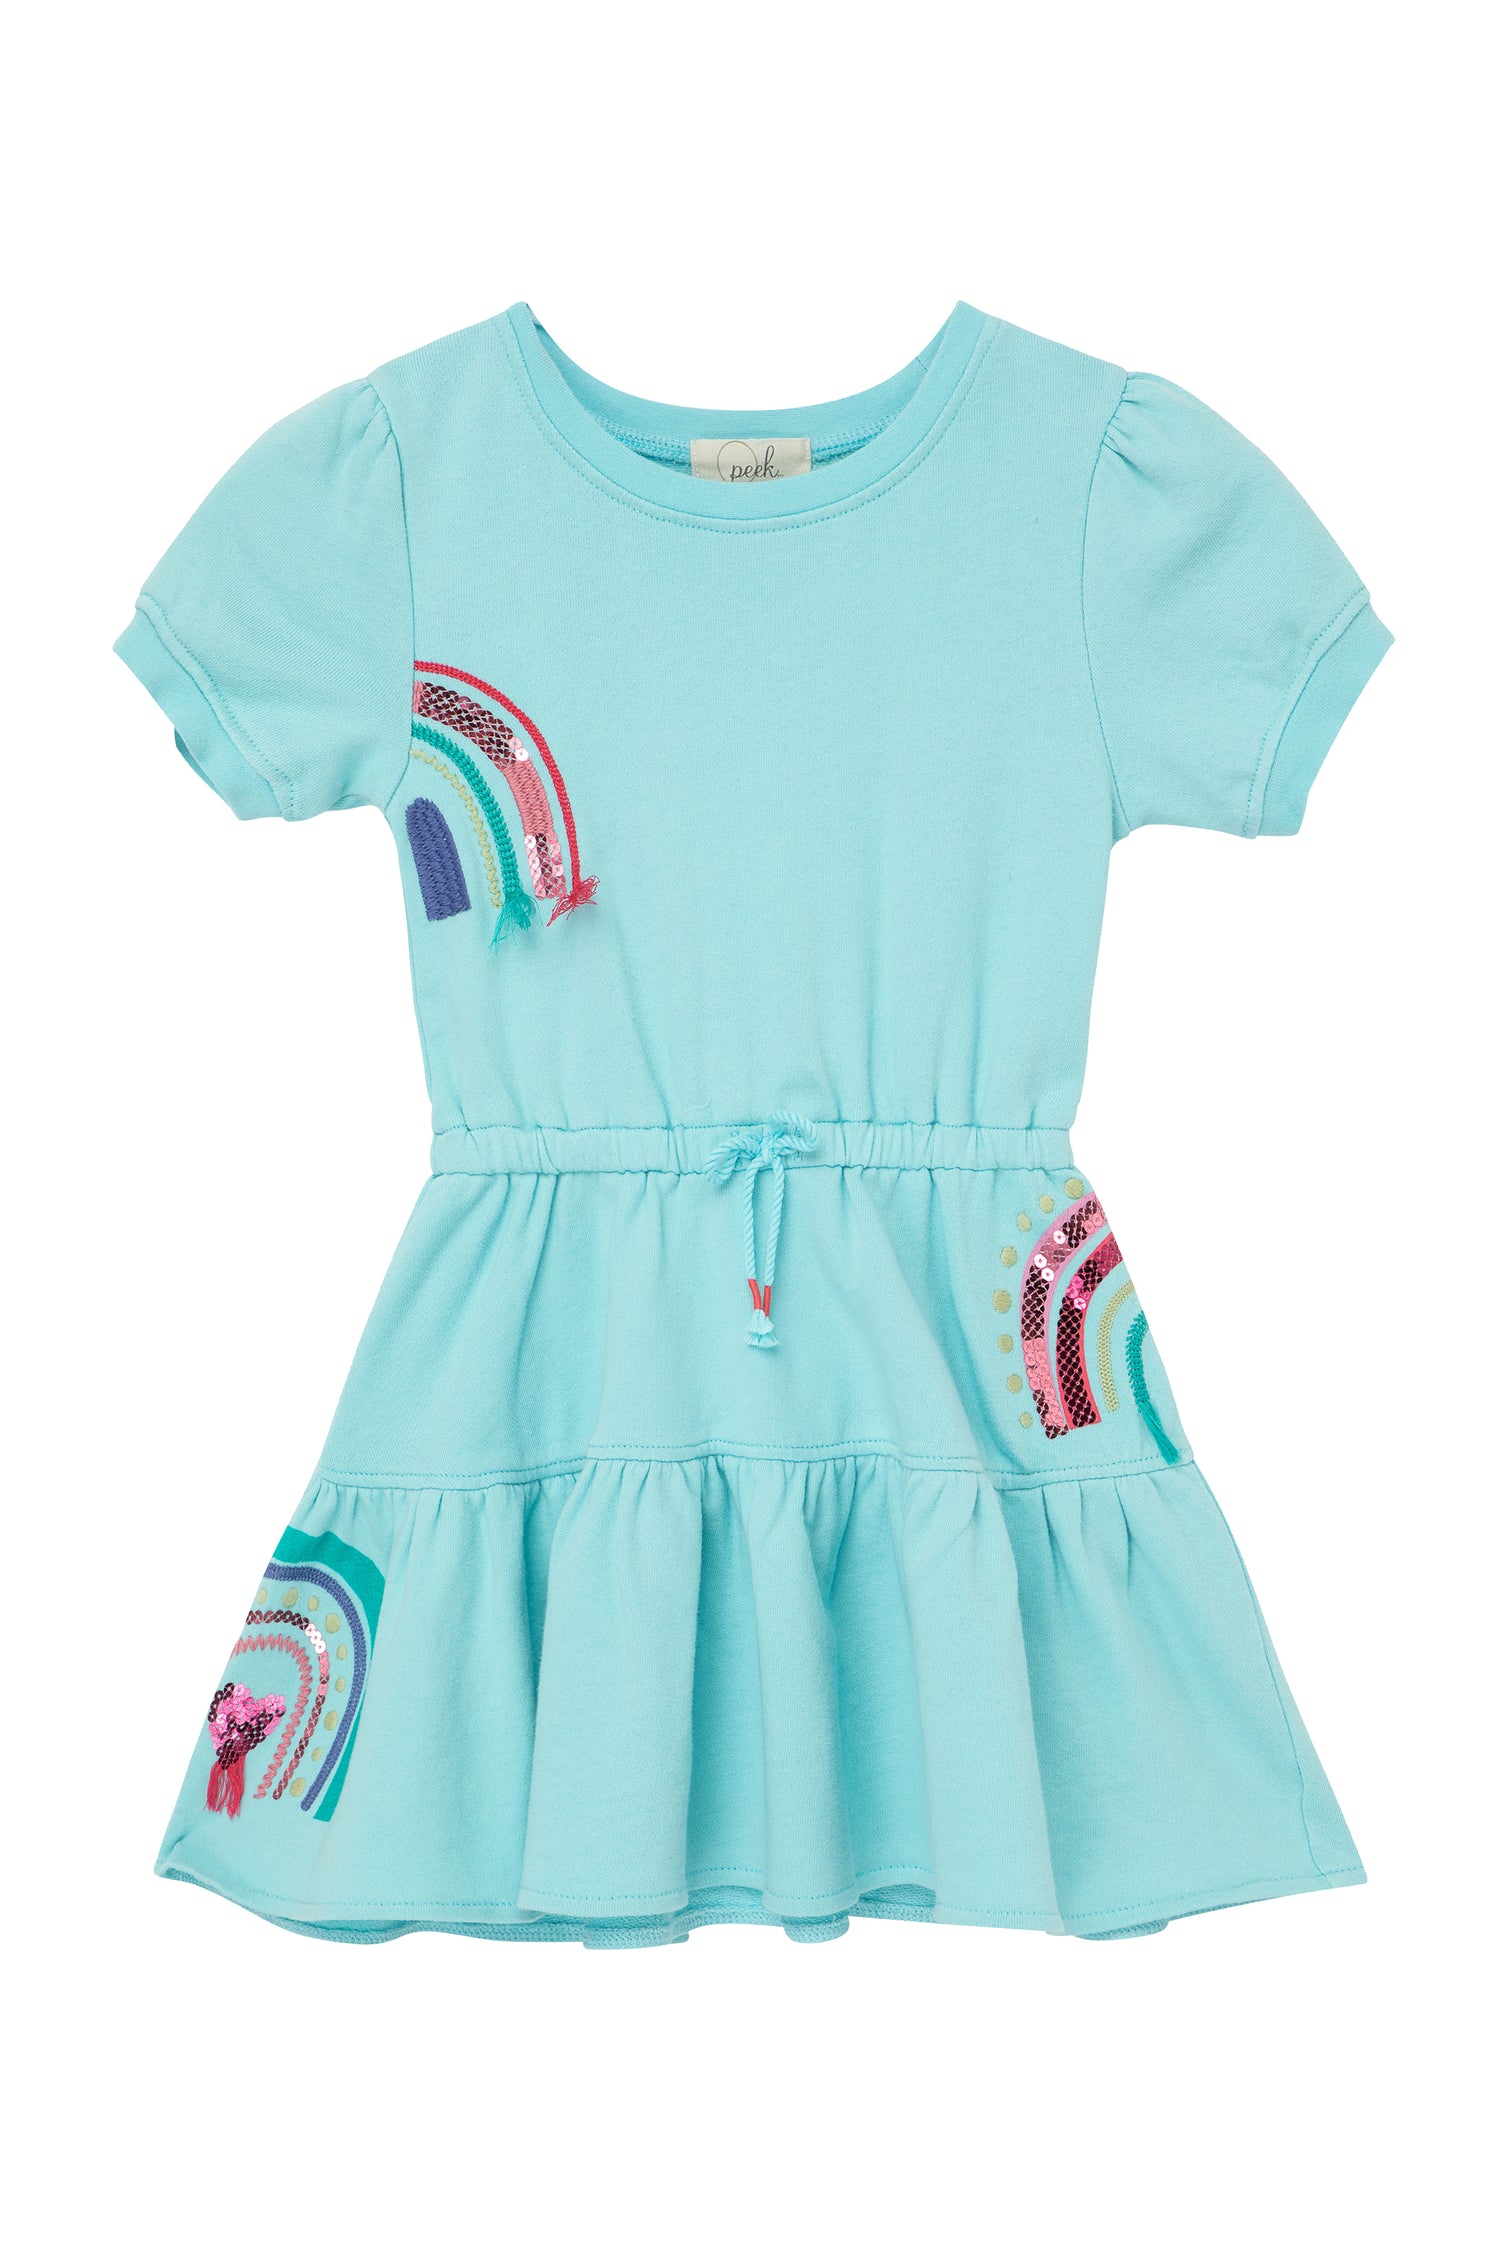 Front view of blue ruffle dress with rainbow pattern